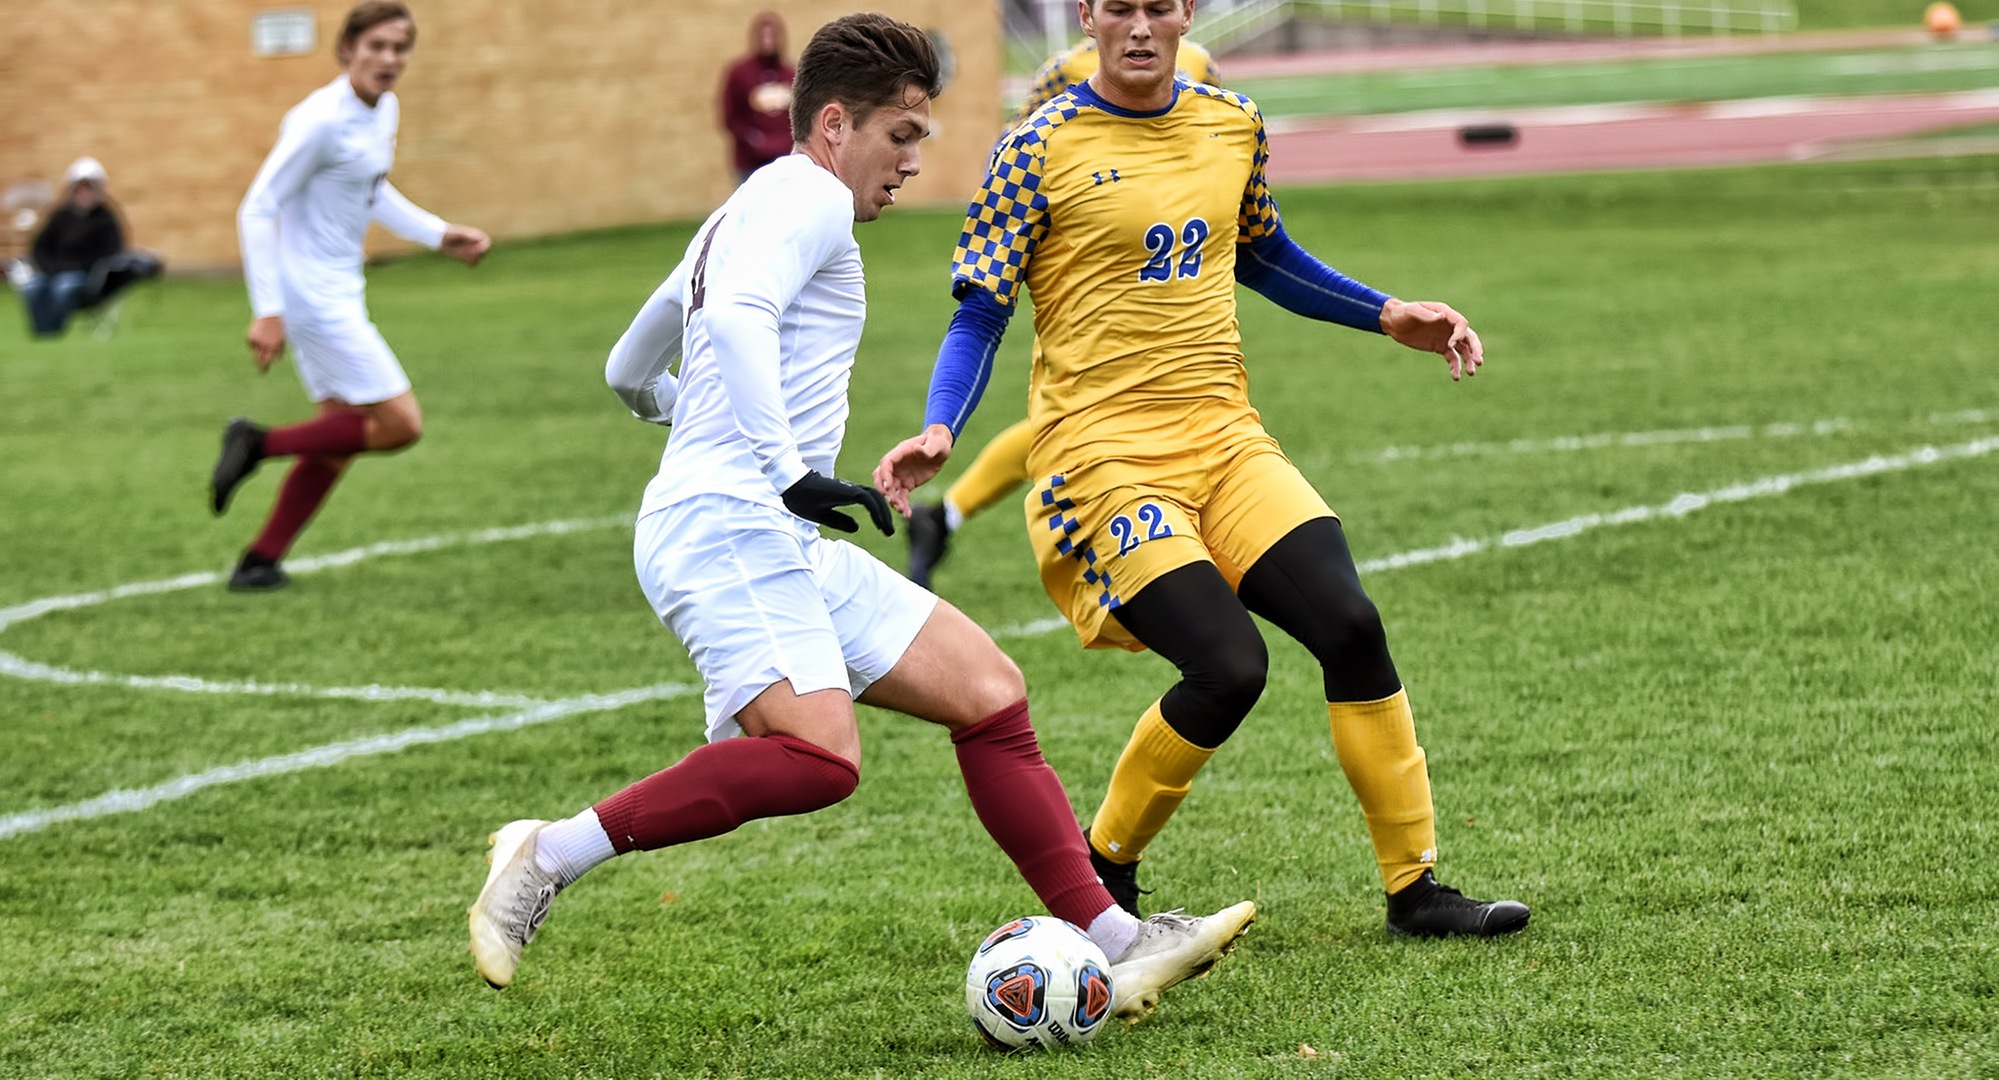 Sophomore Nate Weaver scored the game-winning goal in the Cobbers' 2-0 win at Macalester.